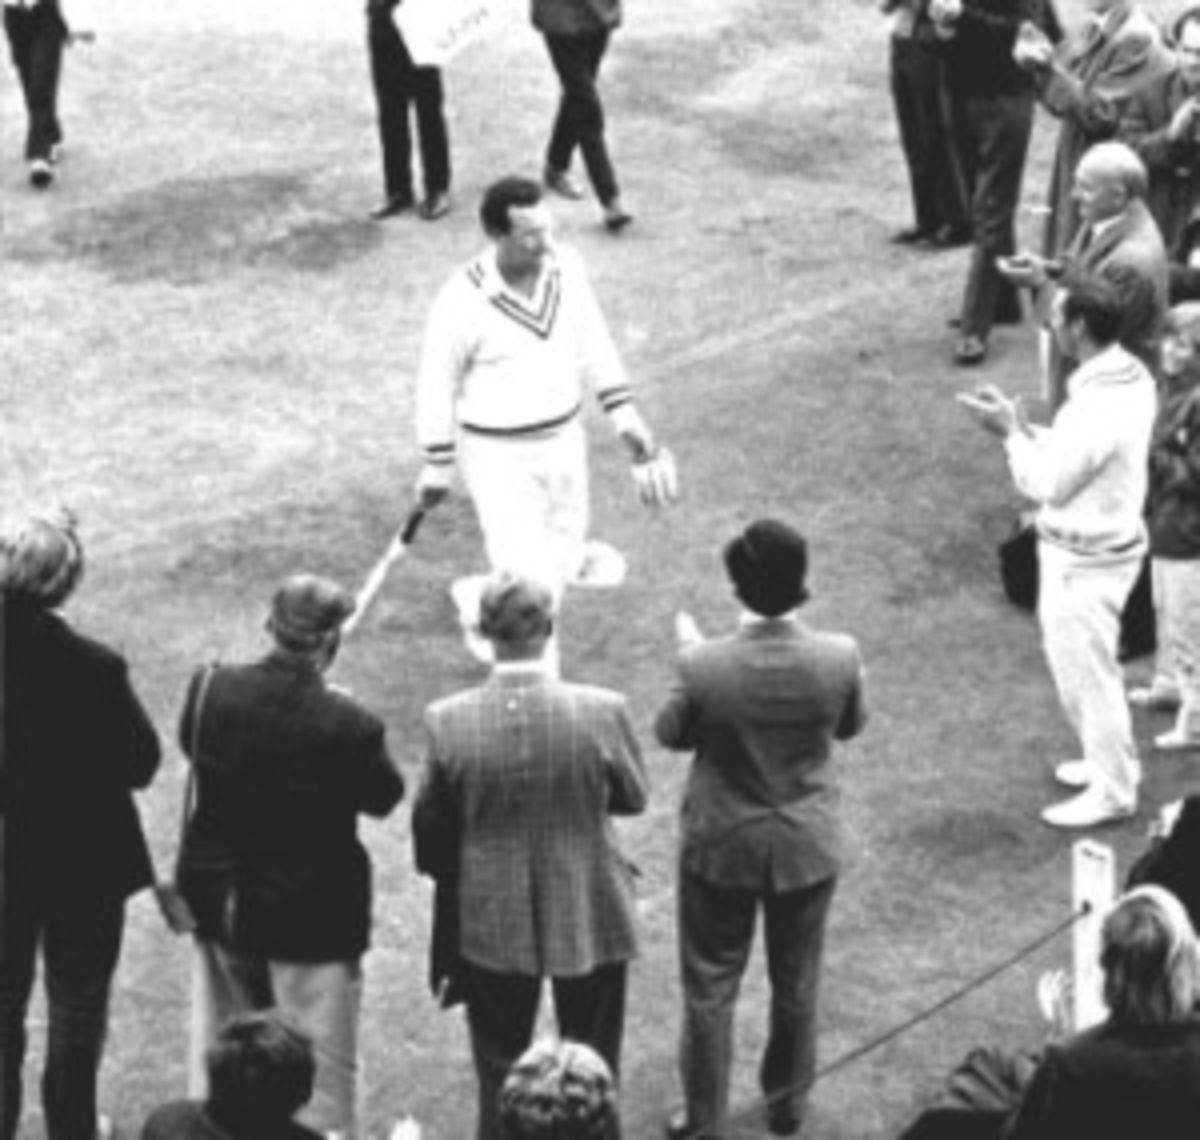 Roy Marshall returning to the pavilion after his last innings for Hampshire.